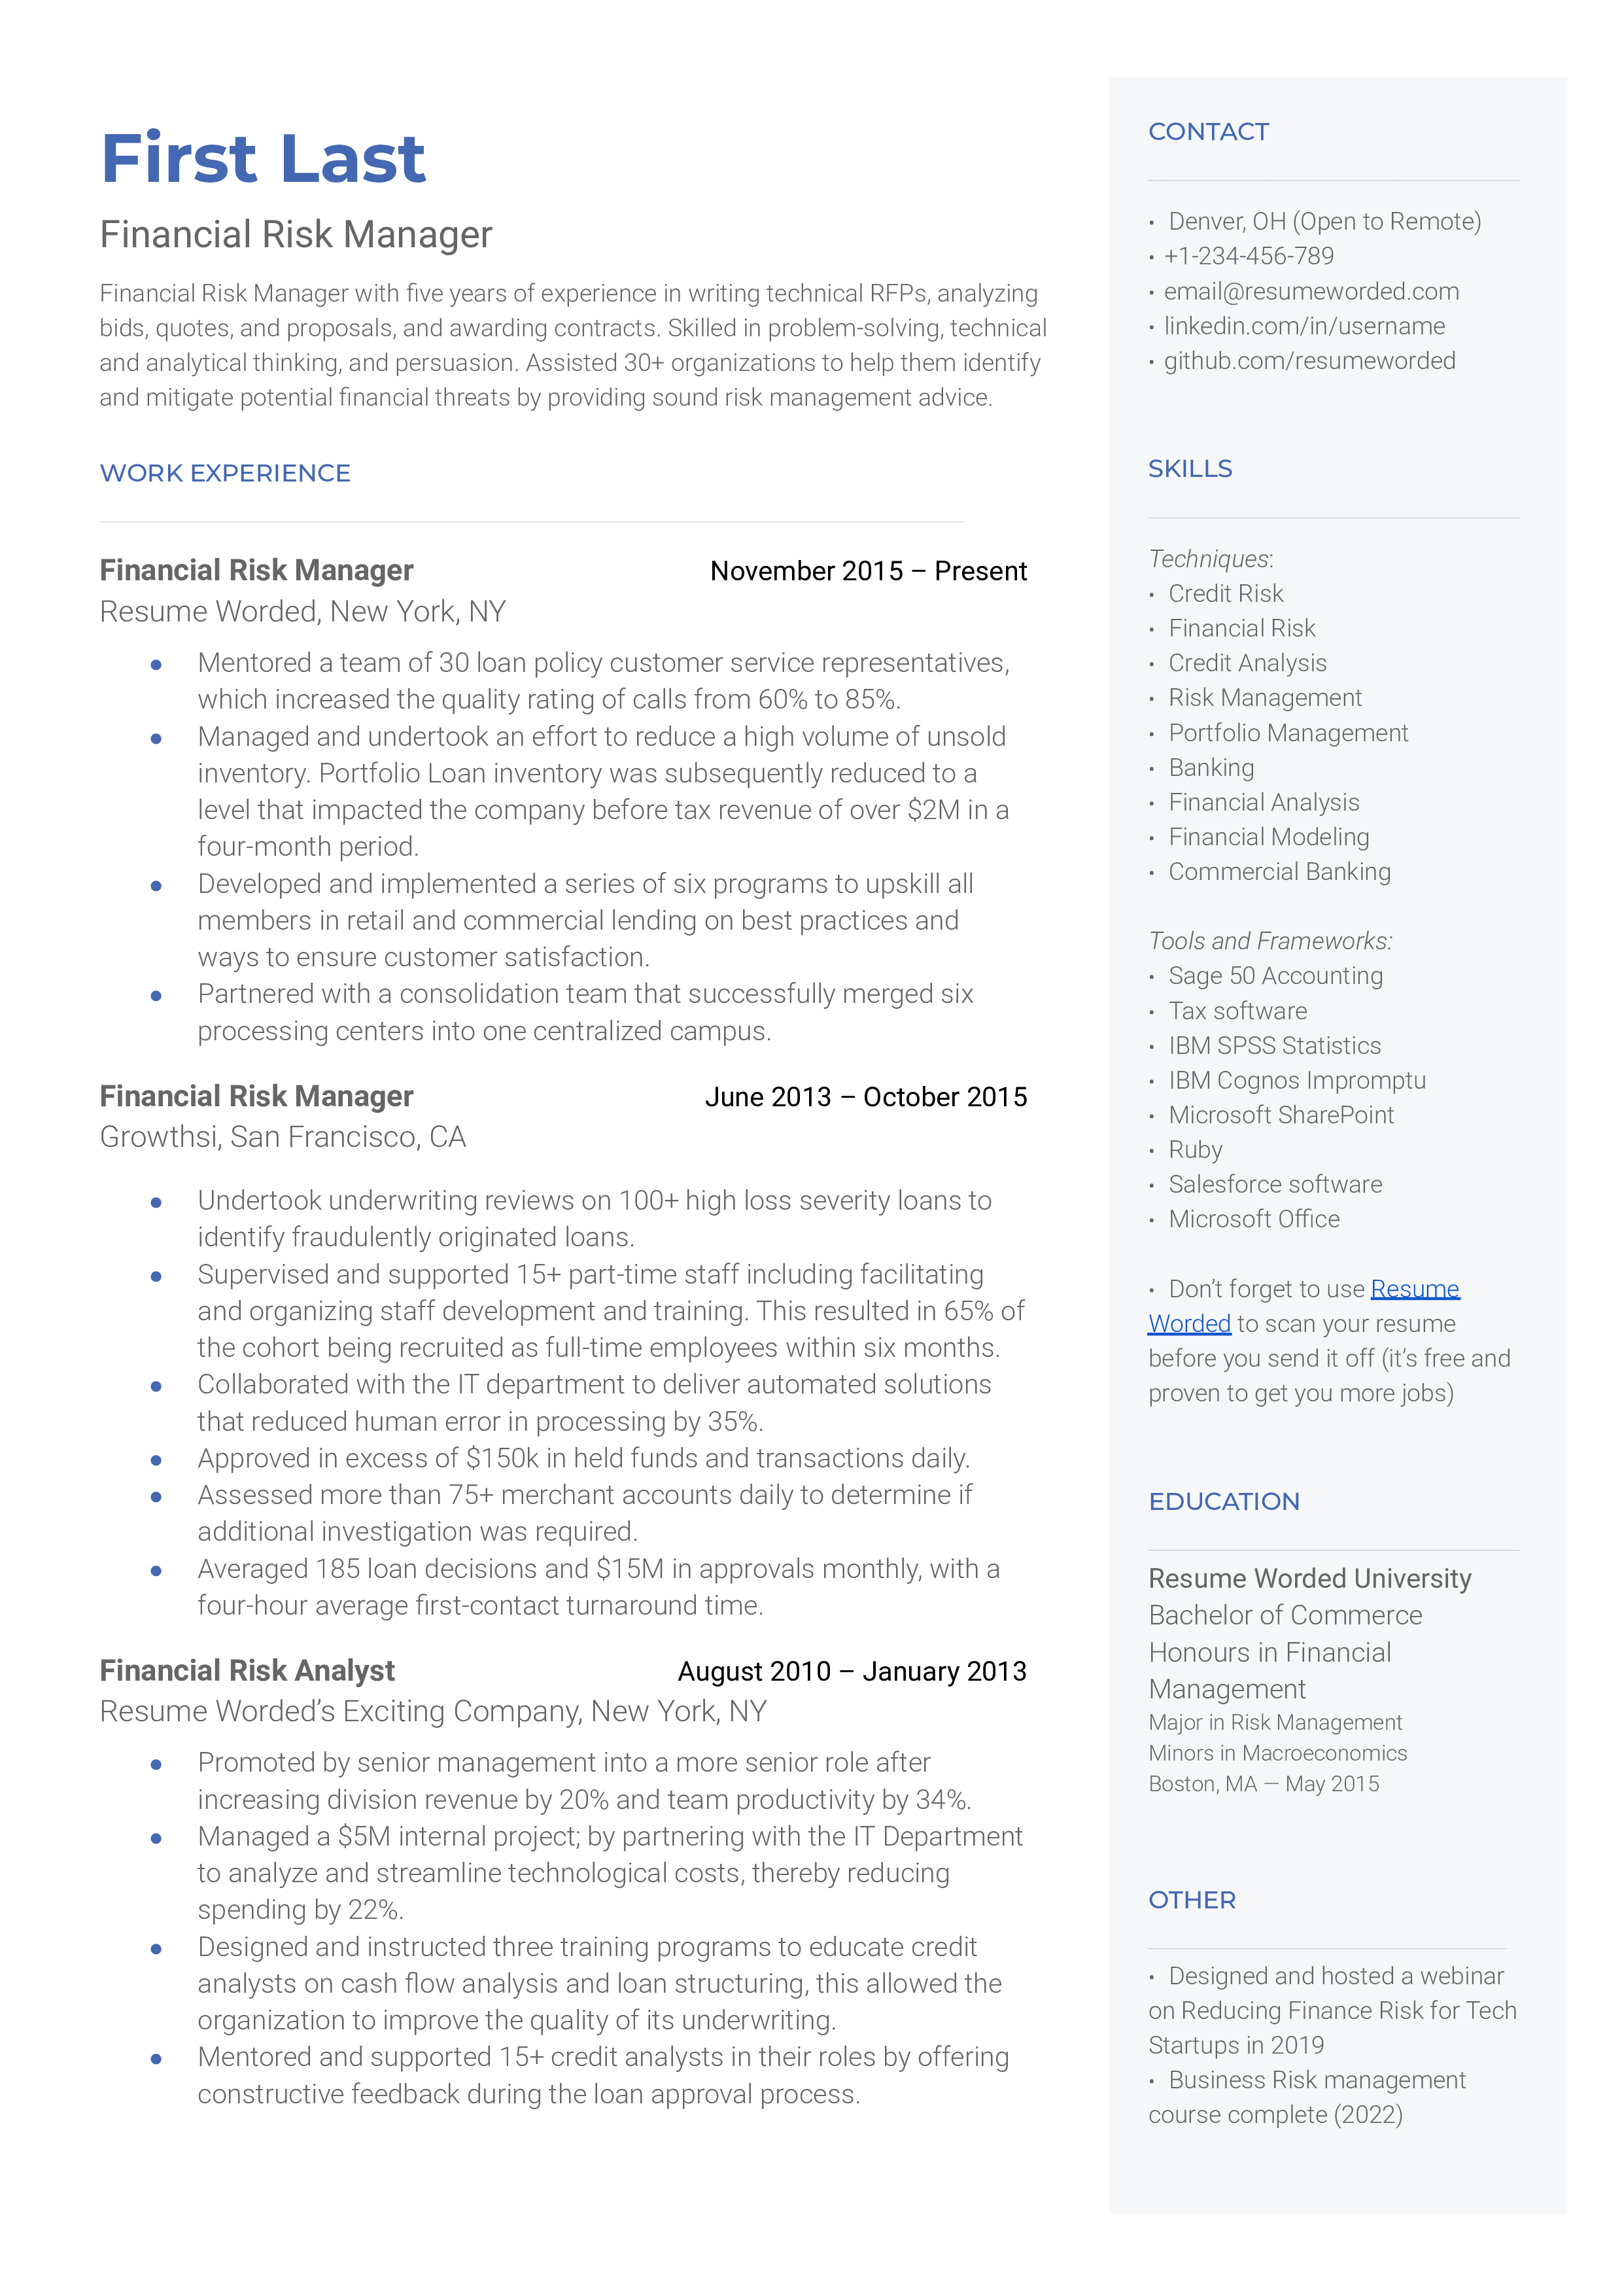 Financial Risk Manager Resume Template + Example